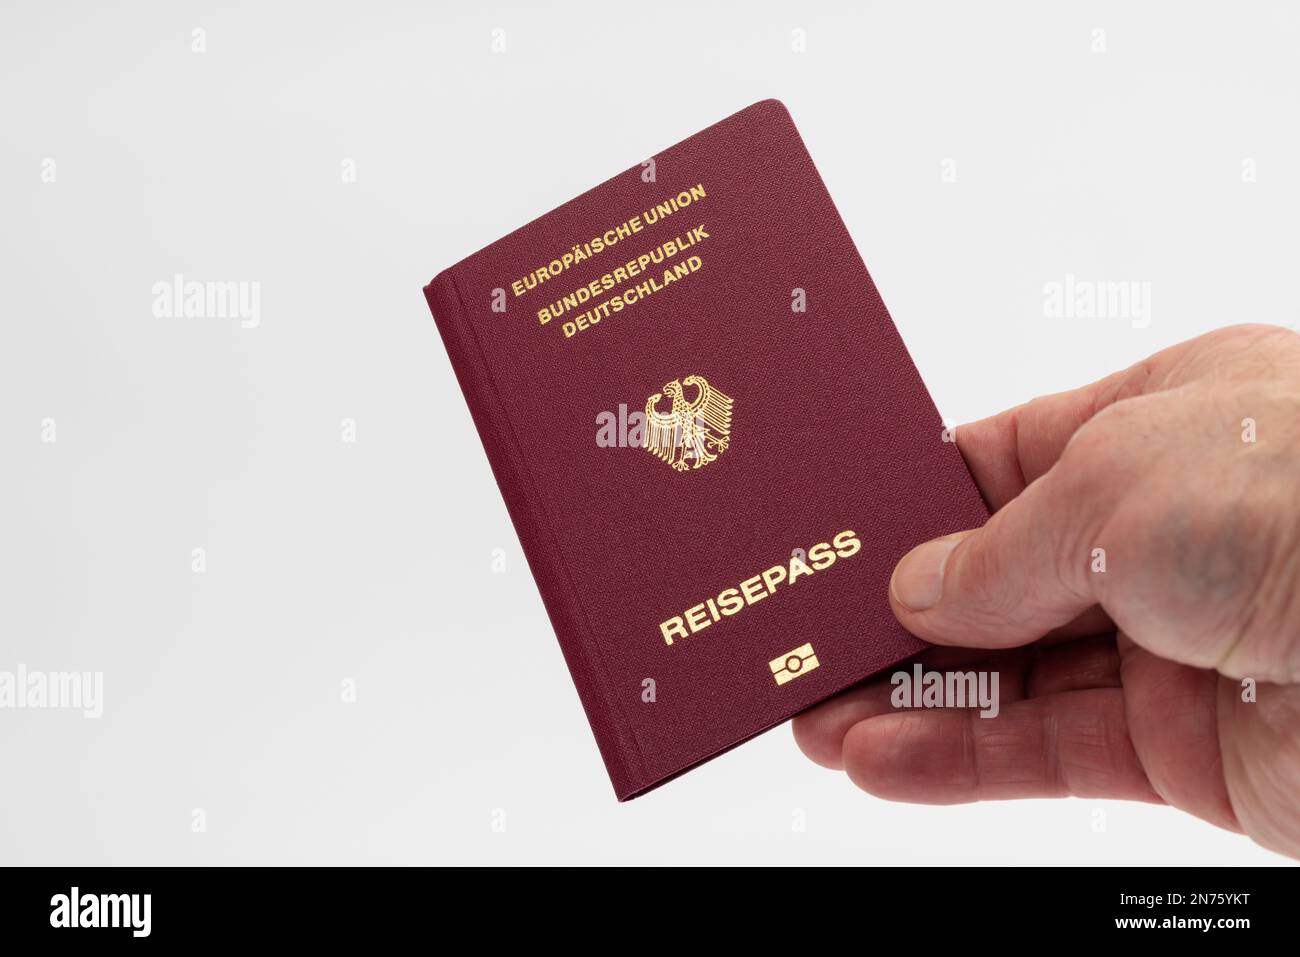 Male hand holding passport of Federal Republic of Germany, white background, Stock Photo